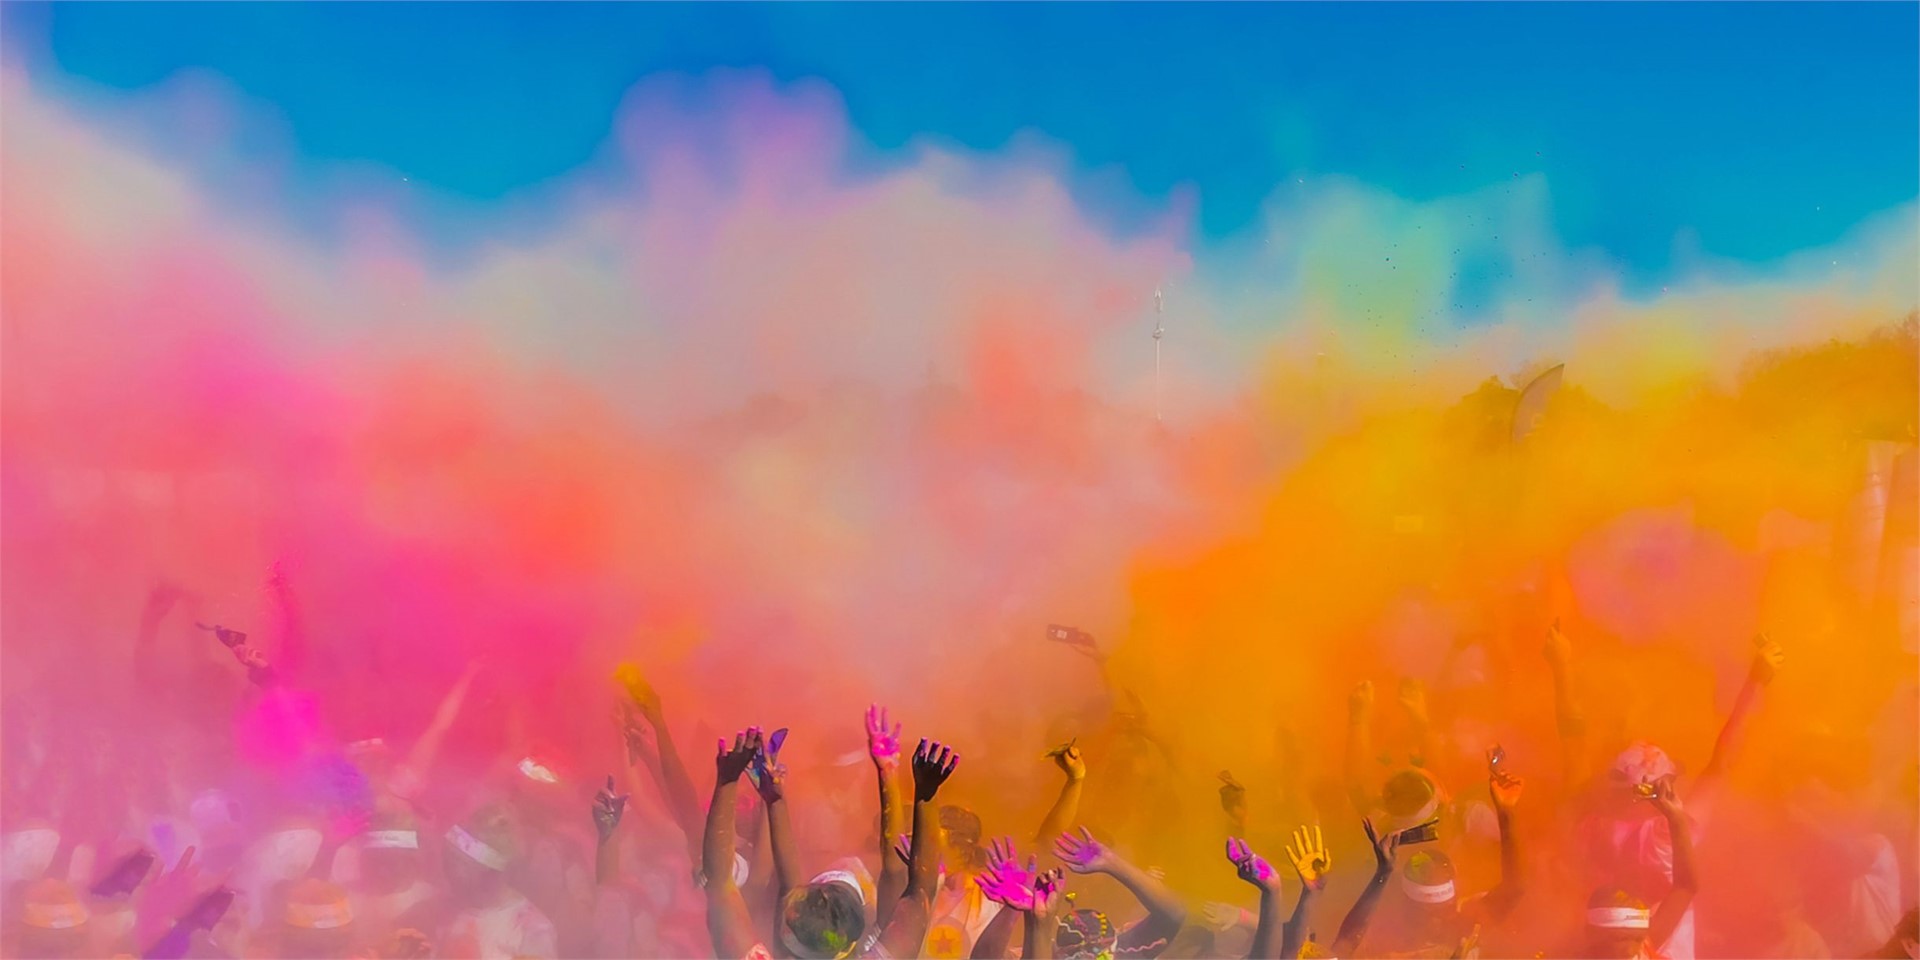 Book your trip to the Holi Festival in Bangalore
